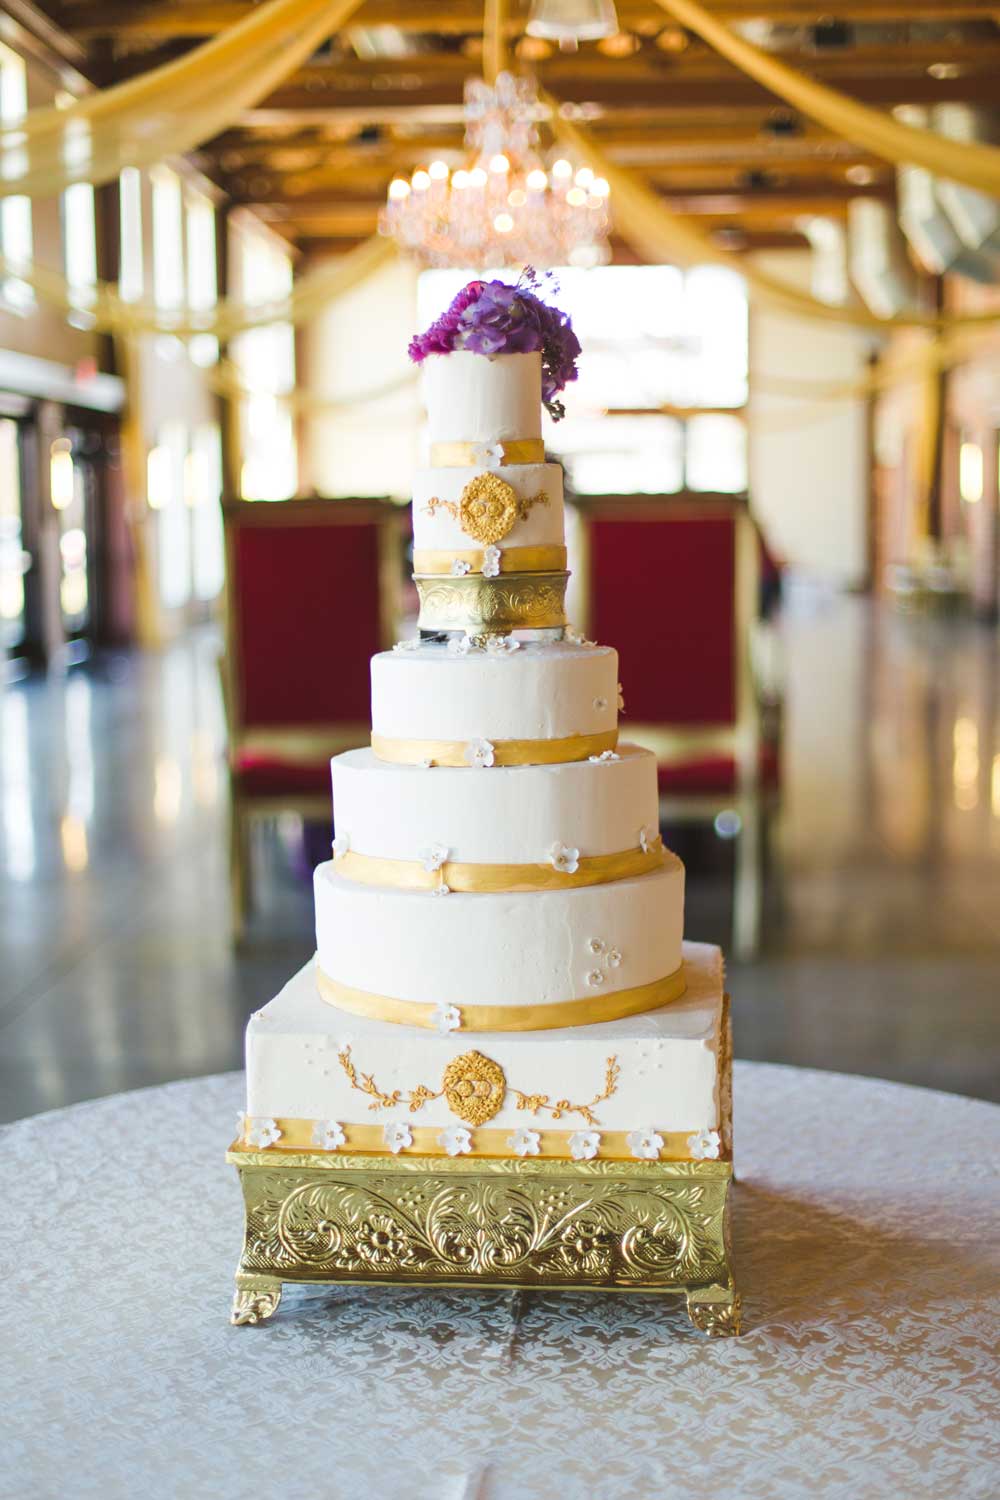 A six-tiered lemon cake with butter cream frosting embellished with gold accents and purple flowers. 